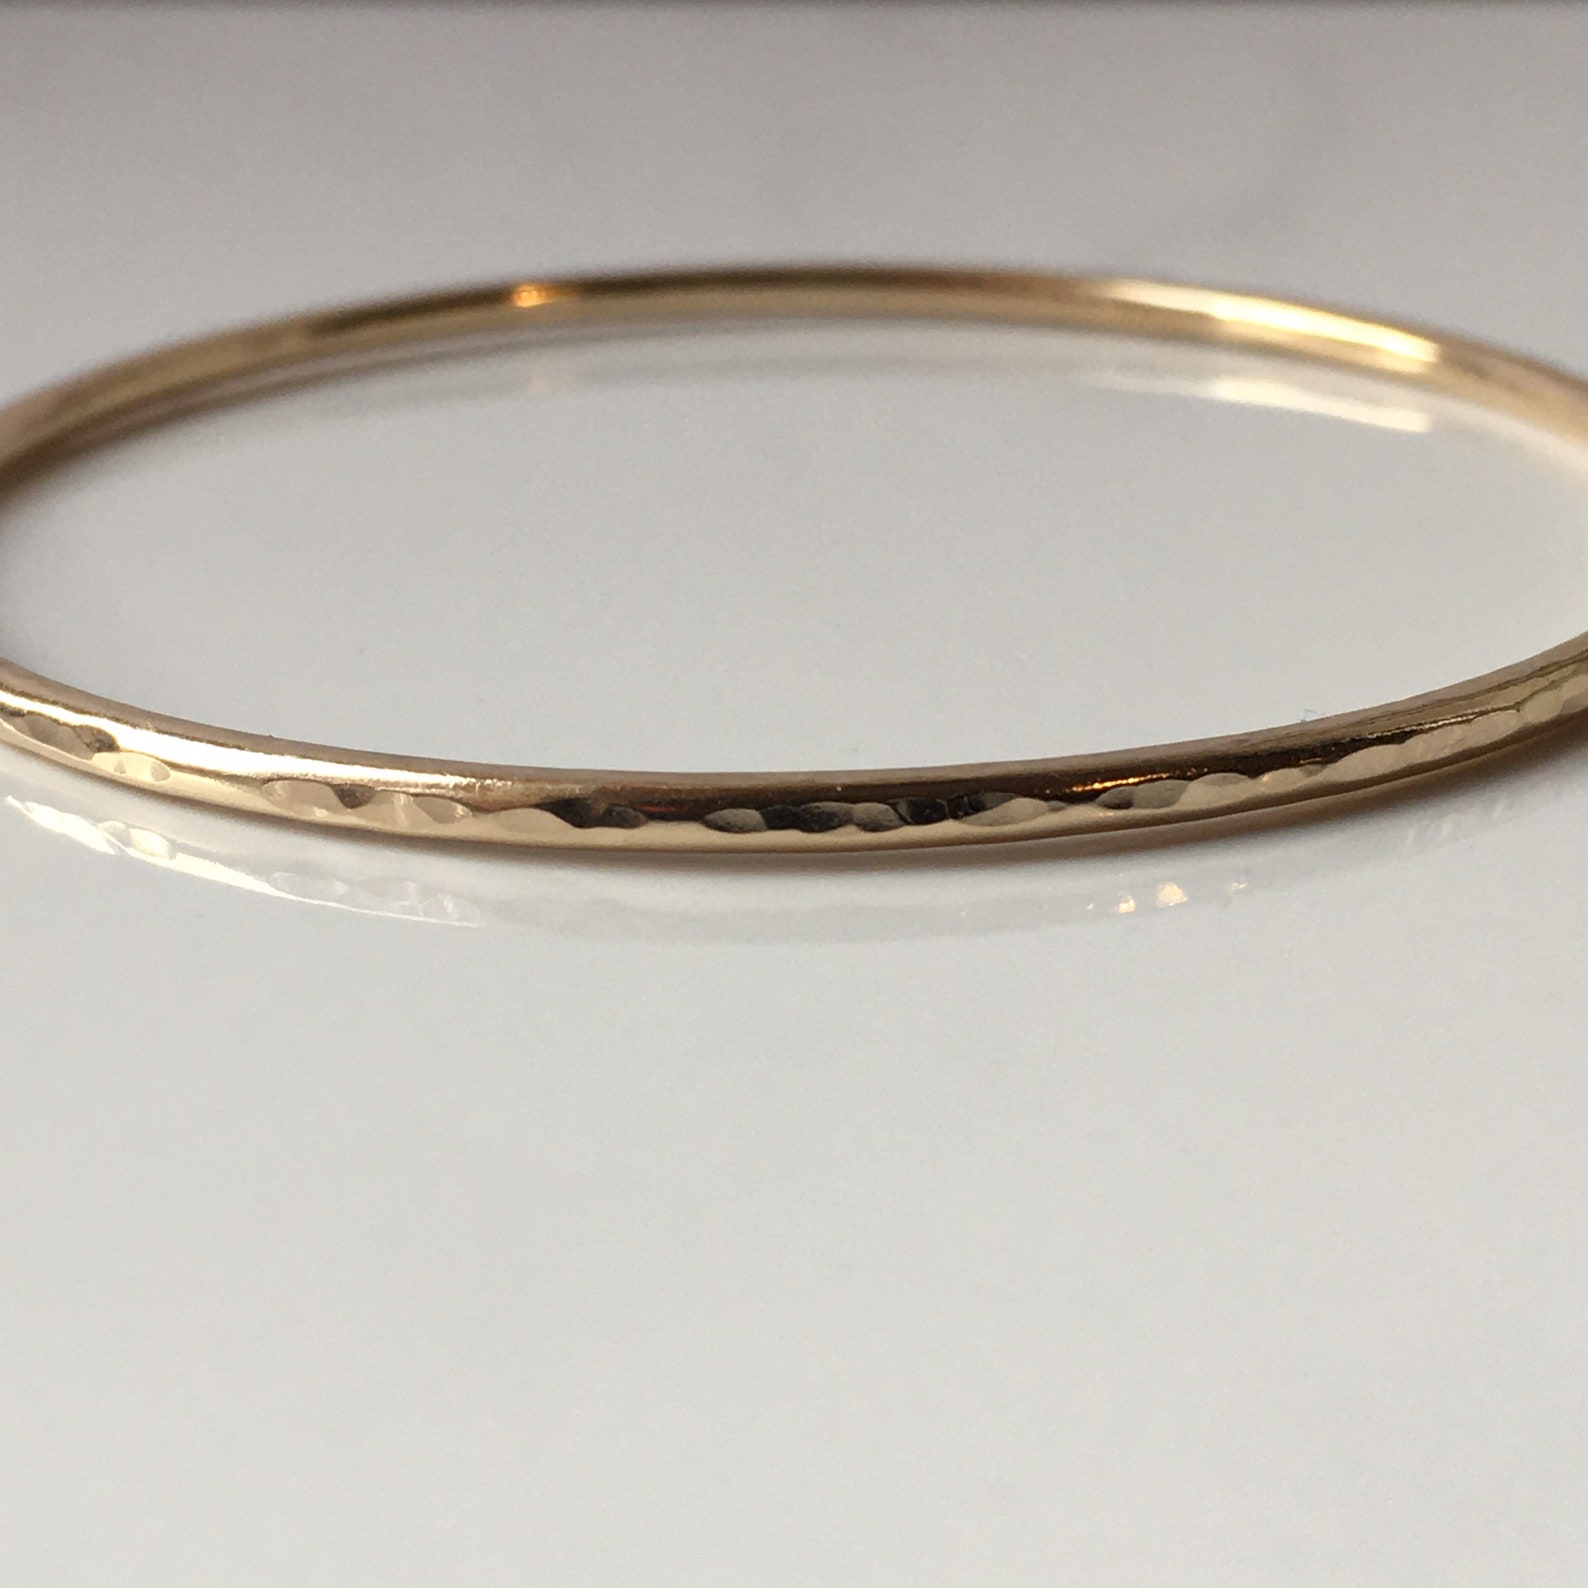 Solid Gold Bangle 9ct Gold Bangle Recycled Gold Gift for | Etsy